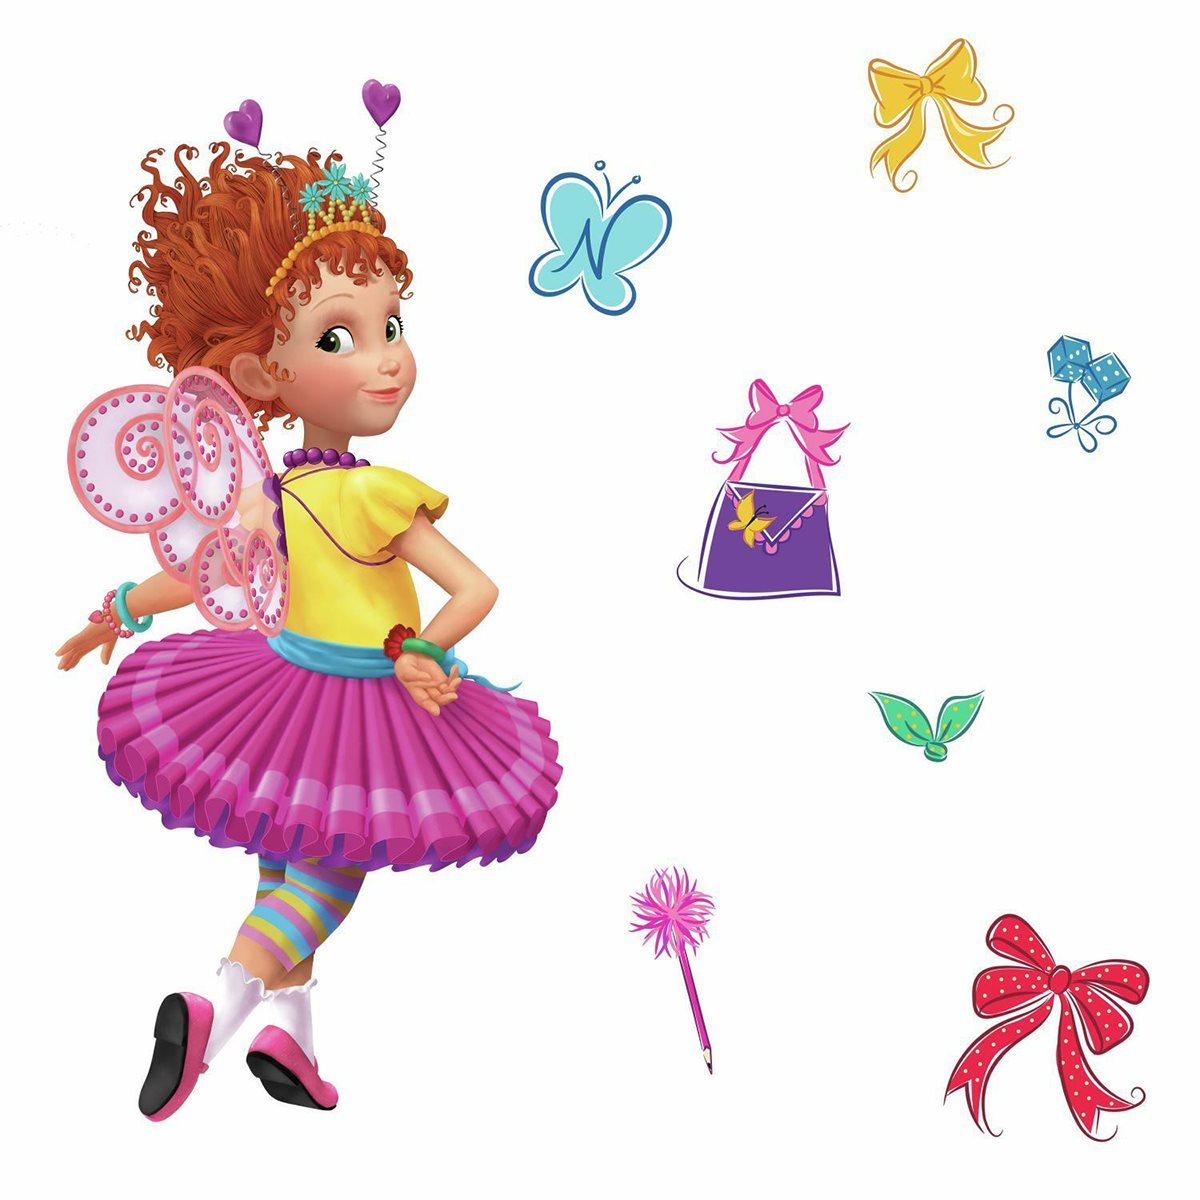 Fancy Nancy Peel and Stick Giant Wall Decals.